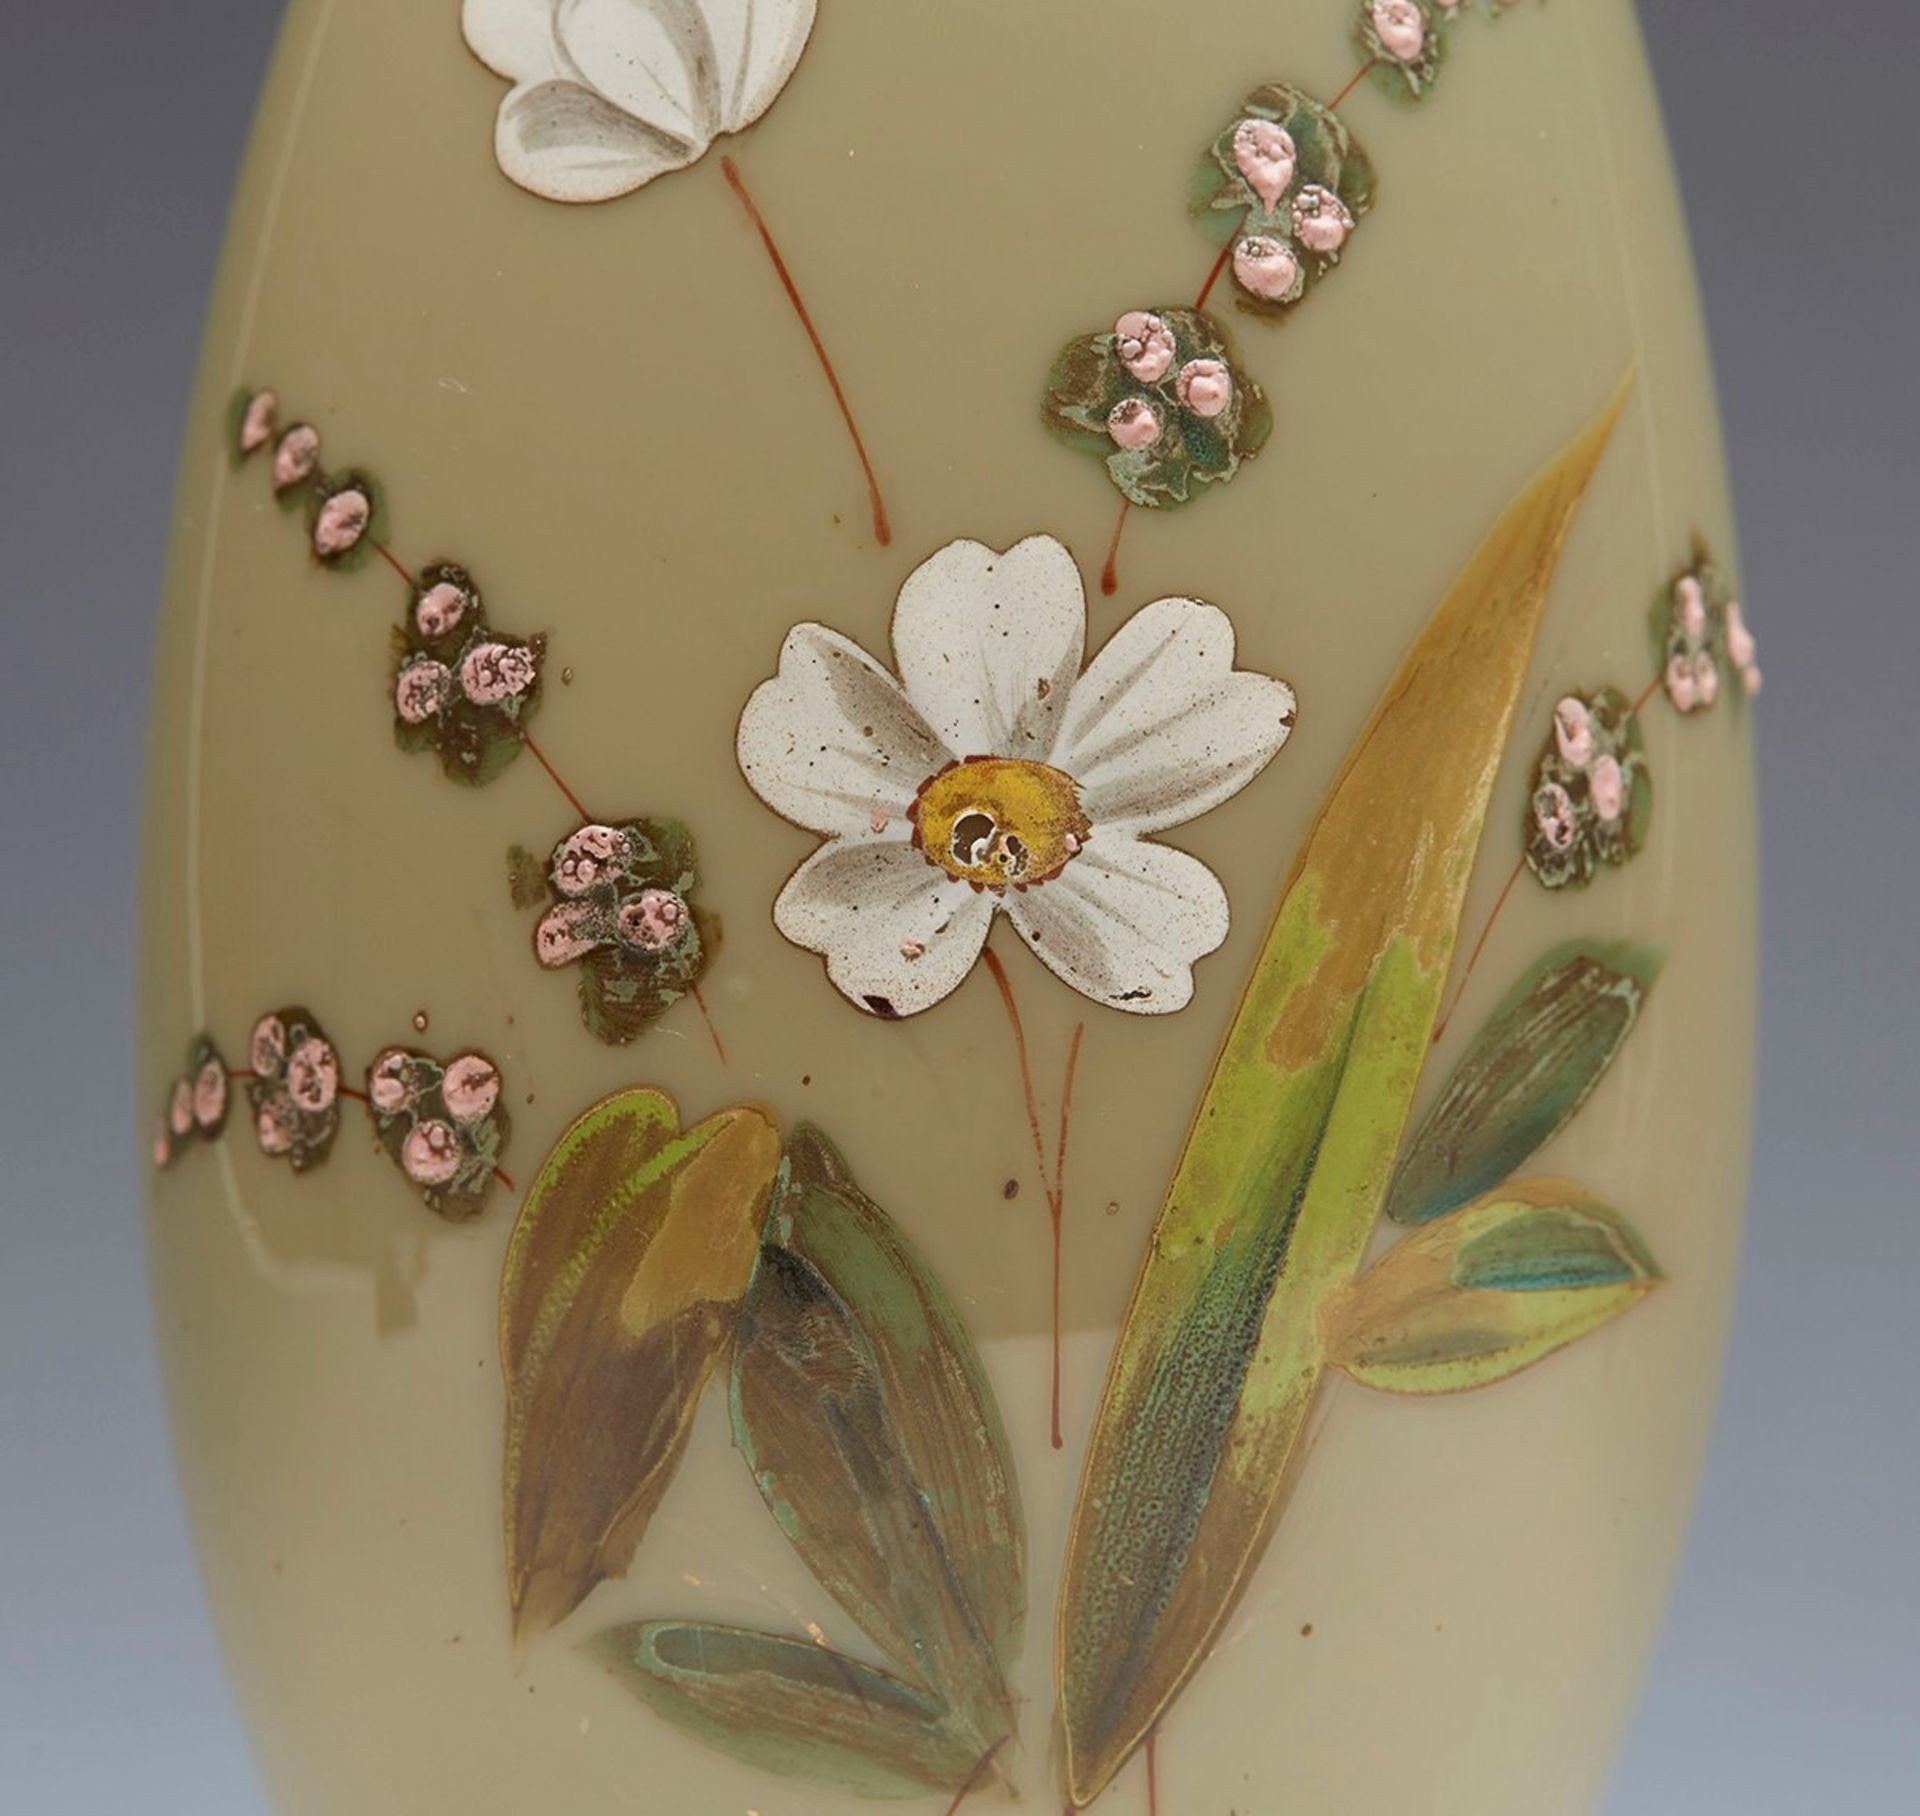 ANTIQUE VICTORIAN FLORAL ENAMEL PAINTED GLASS VASE 19TH C.   DIMENSIONS   Height 23cm, Diameter 8, - Image 2 of 6